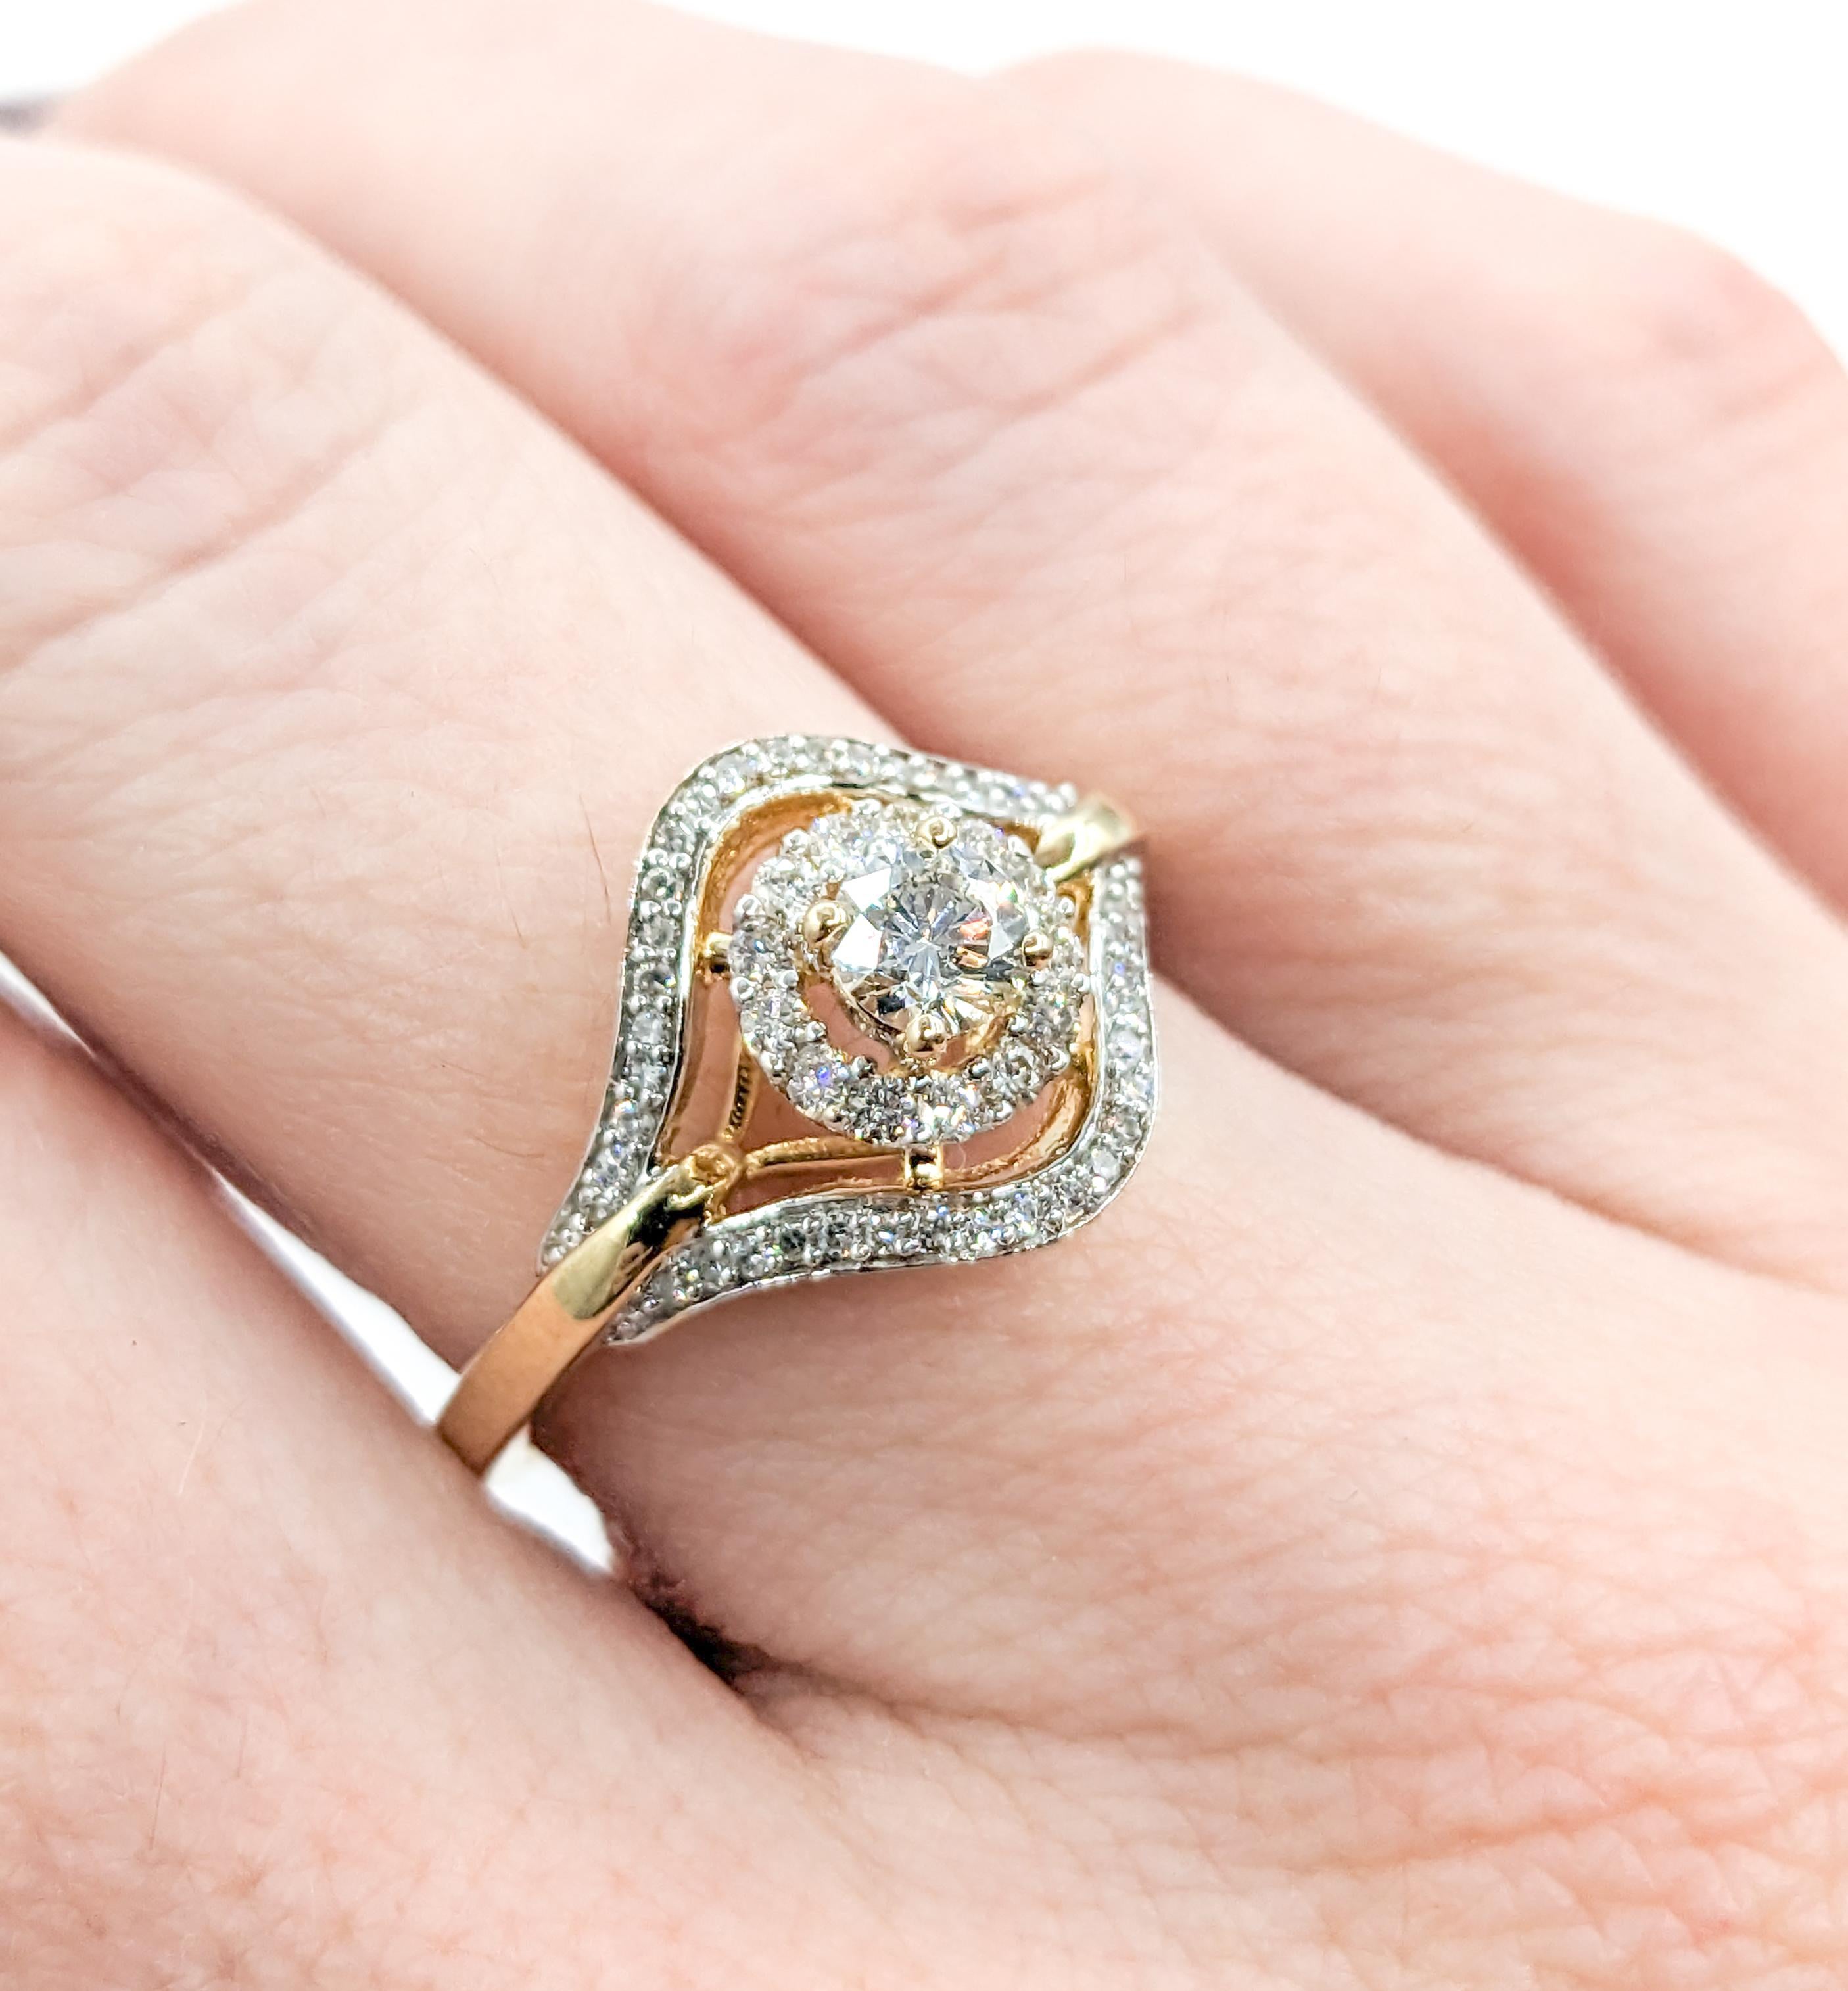 Diamond Halo Engagement Ring in Gold In Excellent Condition For Sale In Bloomington, MN